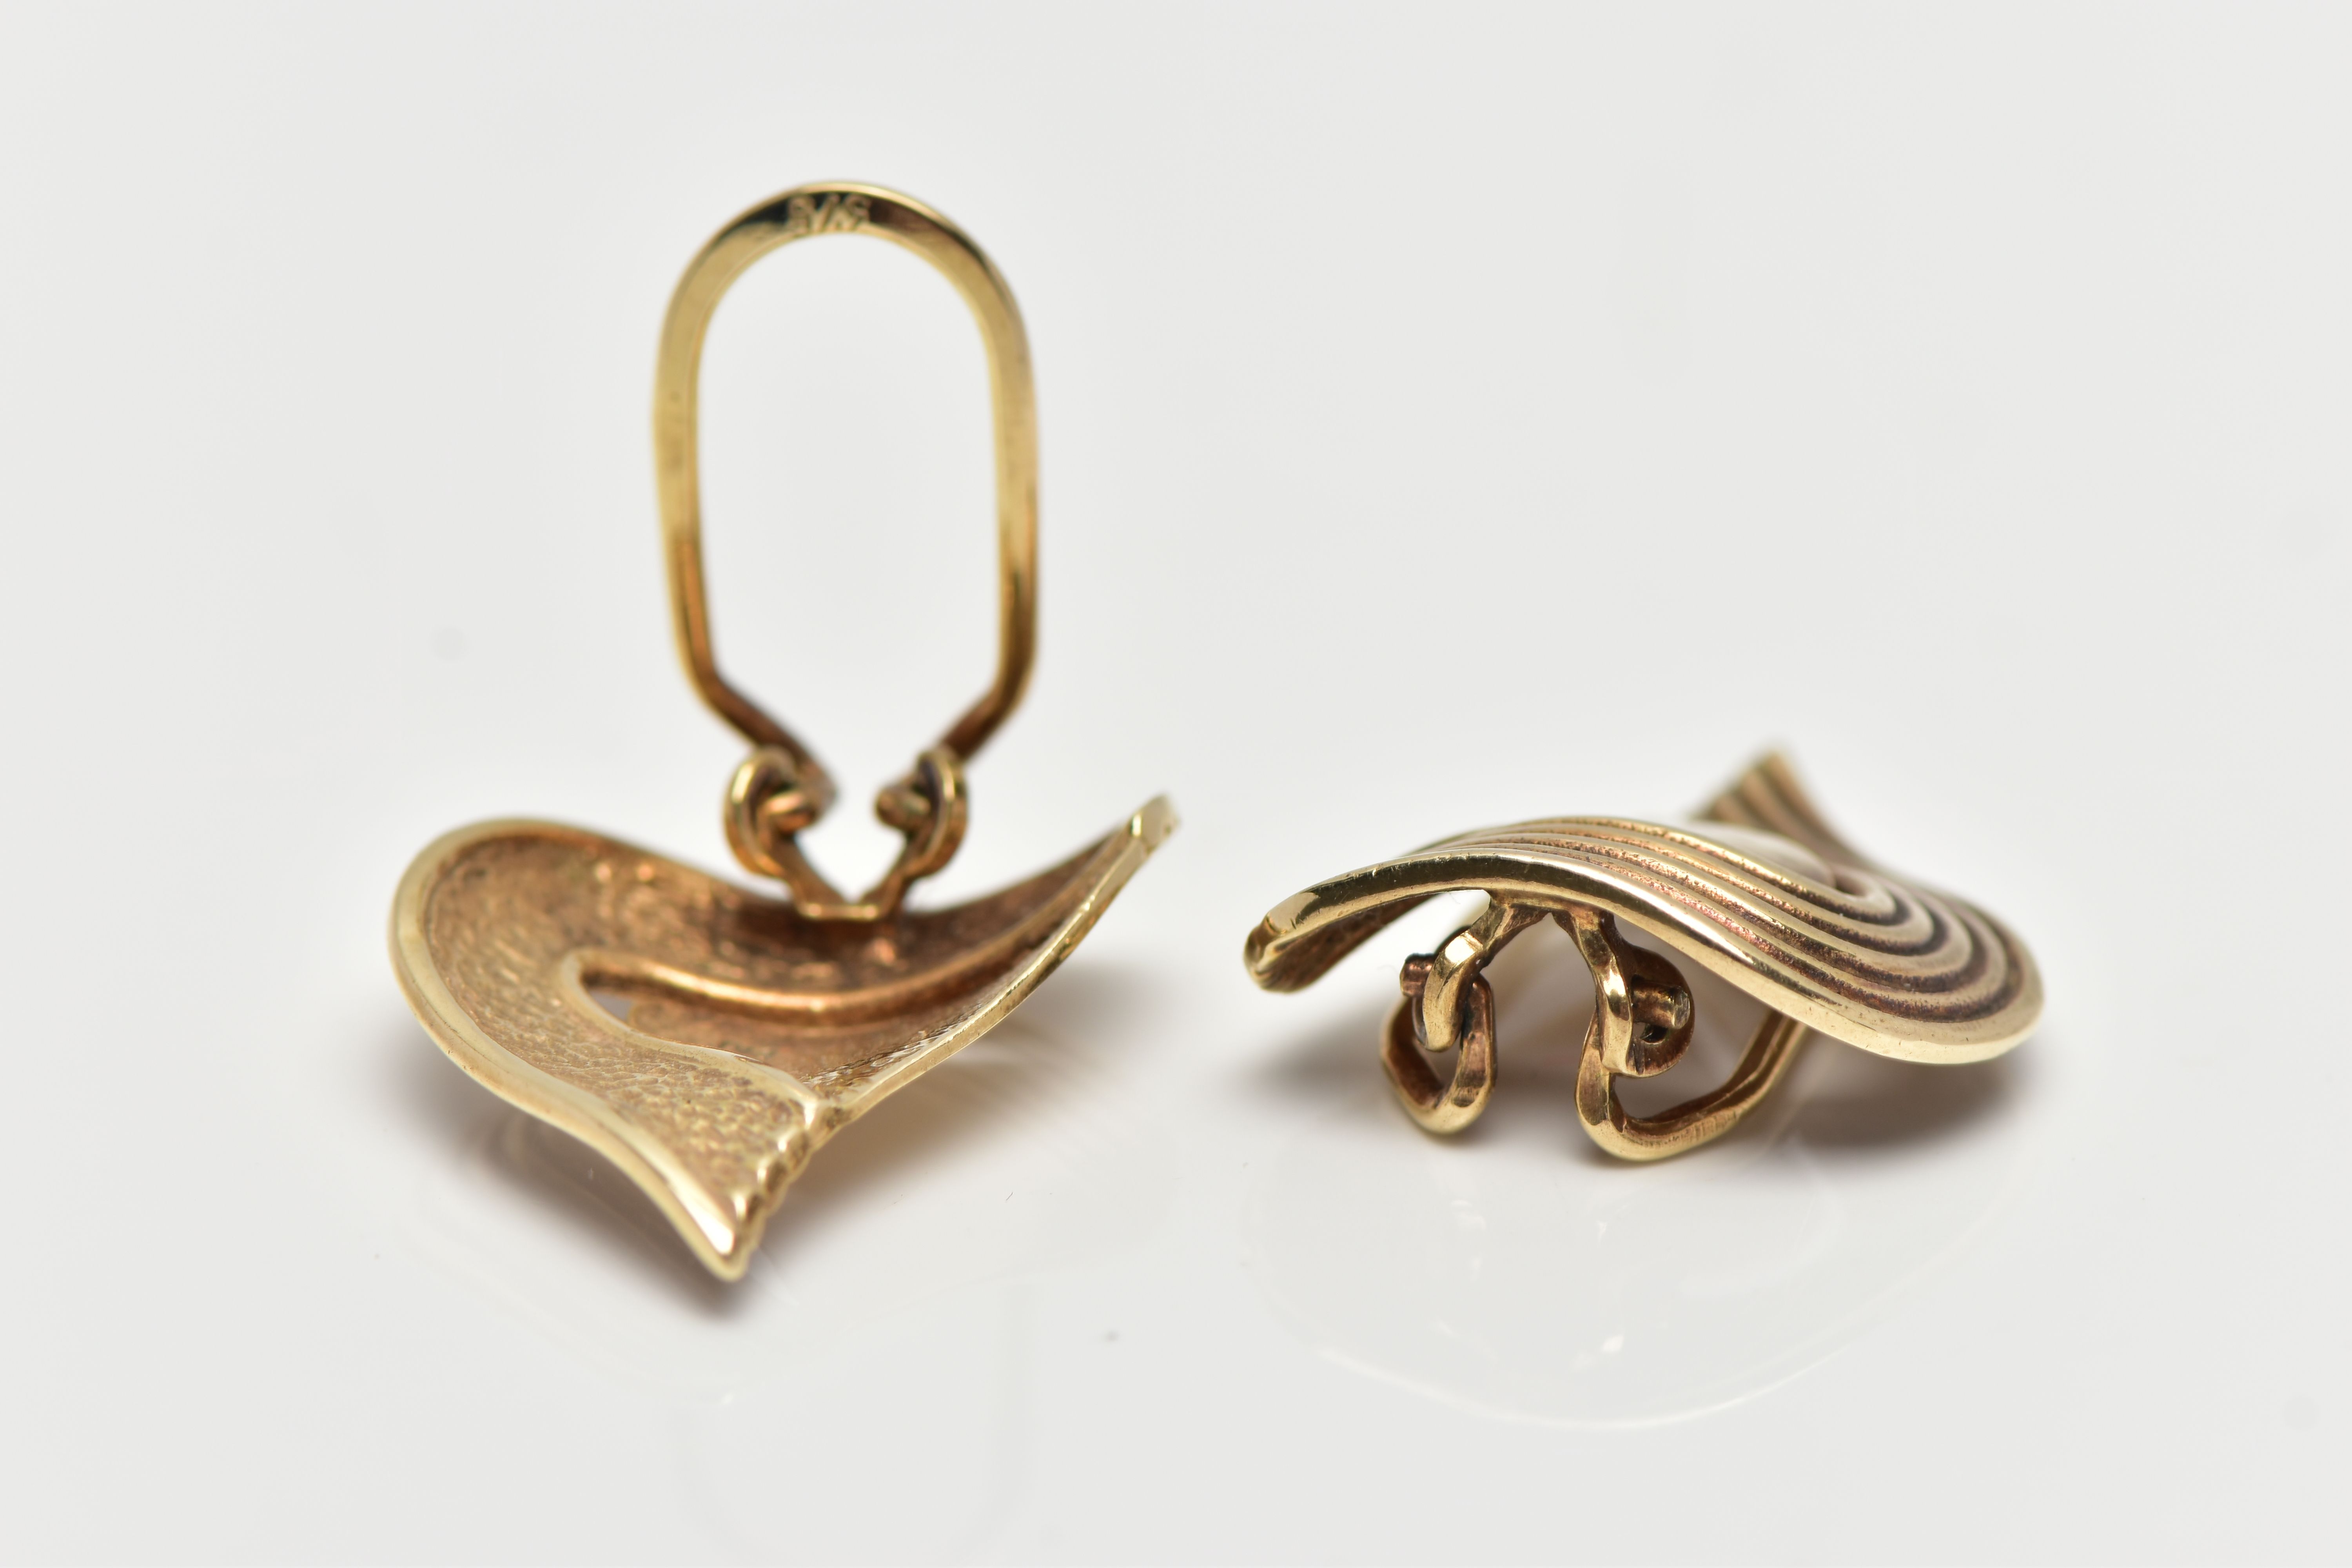 A PAIR OF 9CT GOLD EARRINGS, yellow gold clip on earrings, abstract design with grooved surround, - Image 4 of 4